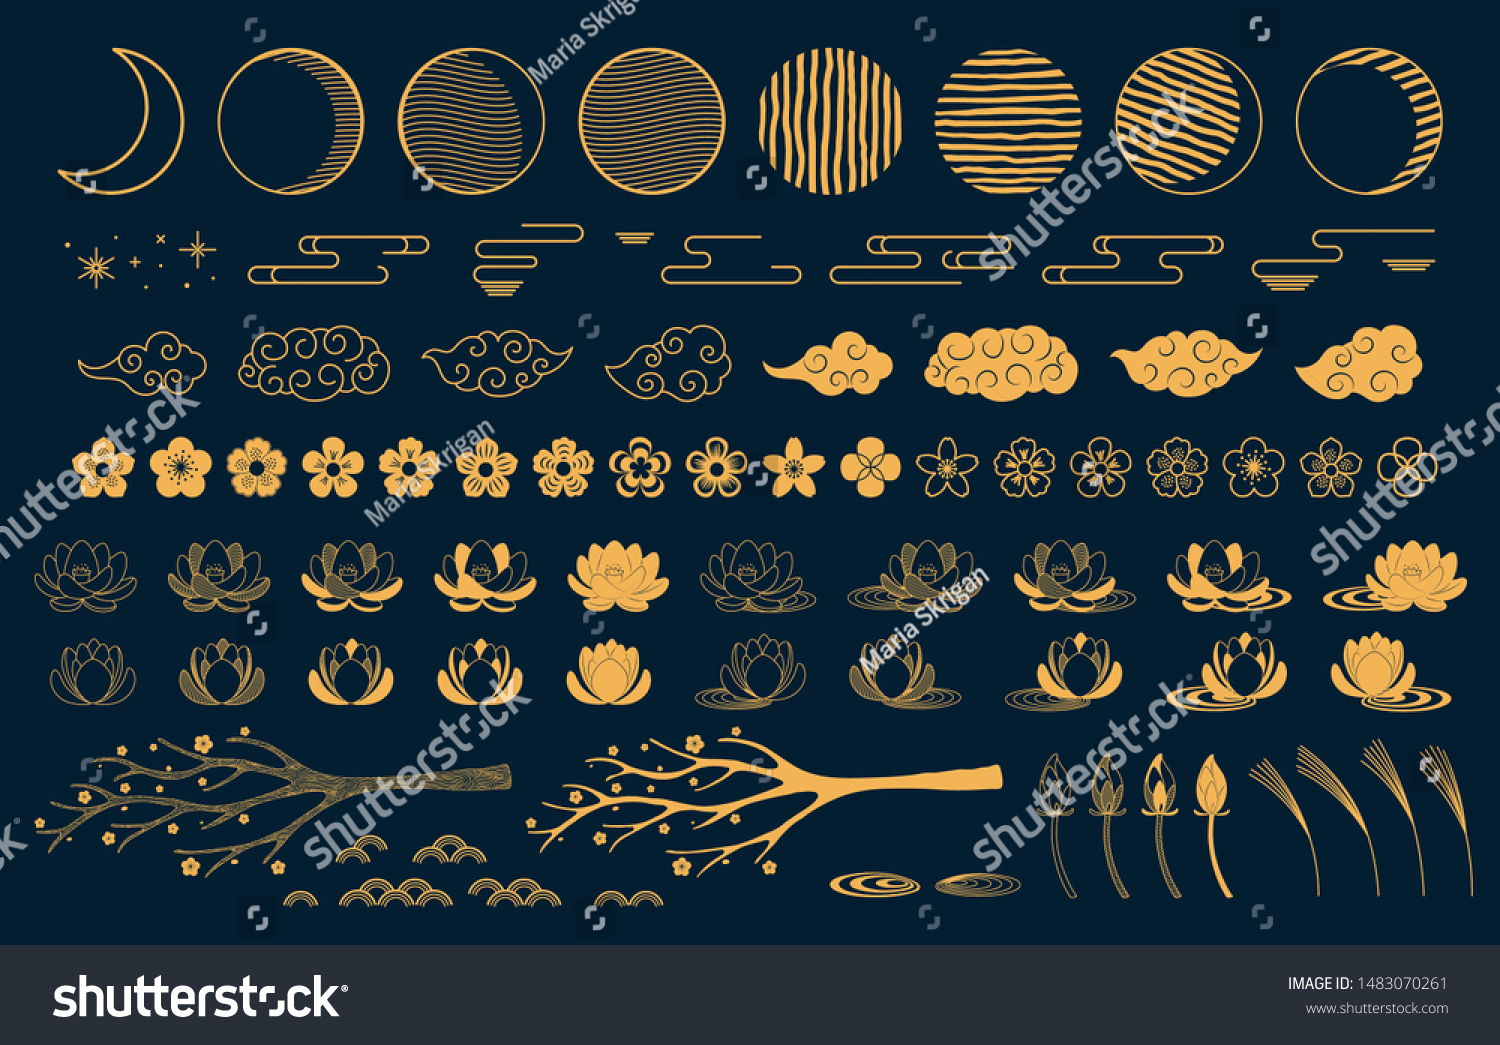 Collection of gold decorative elements in oriental style with moon, stars, clouds, tree branch, lotus flowers, grass, for Chinese New Year, Mid Autumn Festival. Isolated objects. Vector illustration. #1483070261